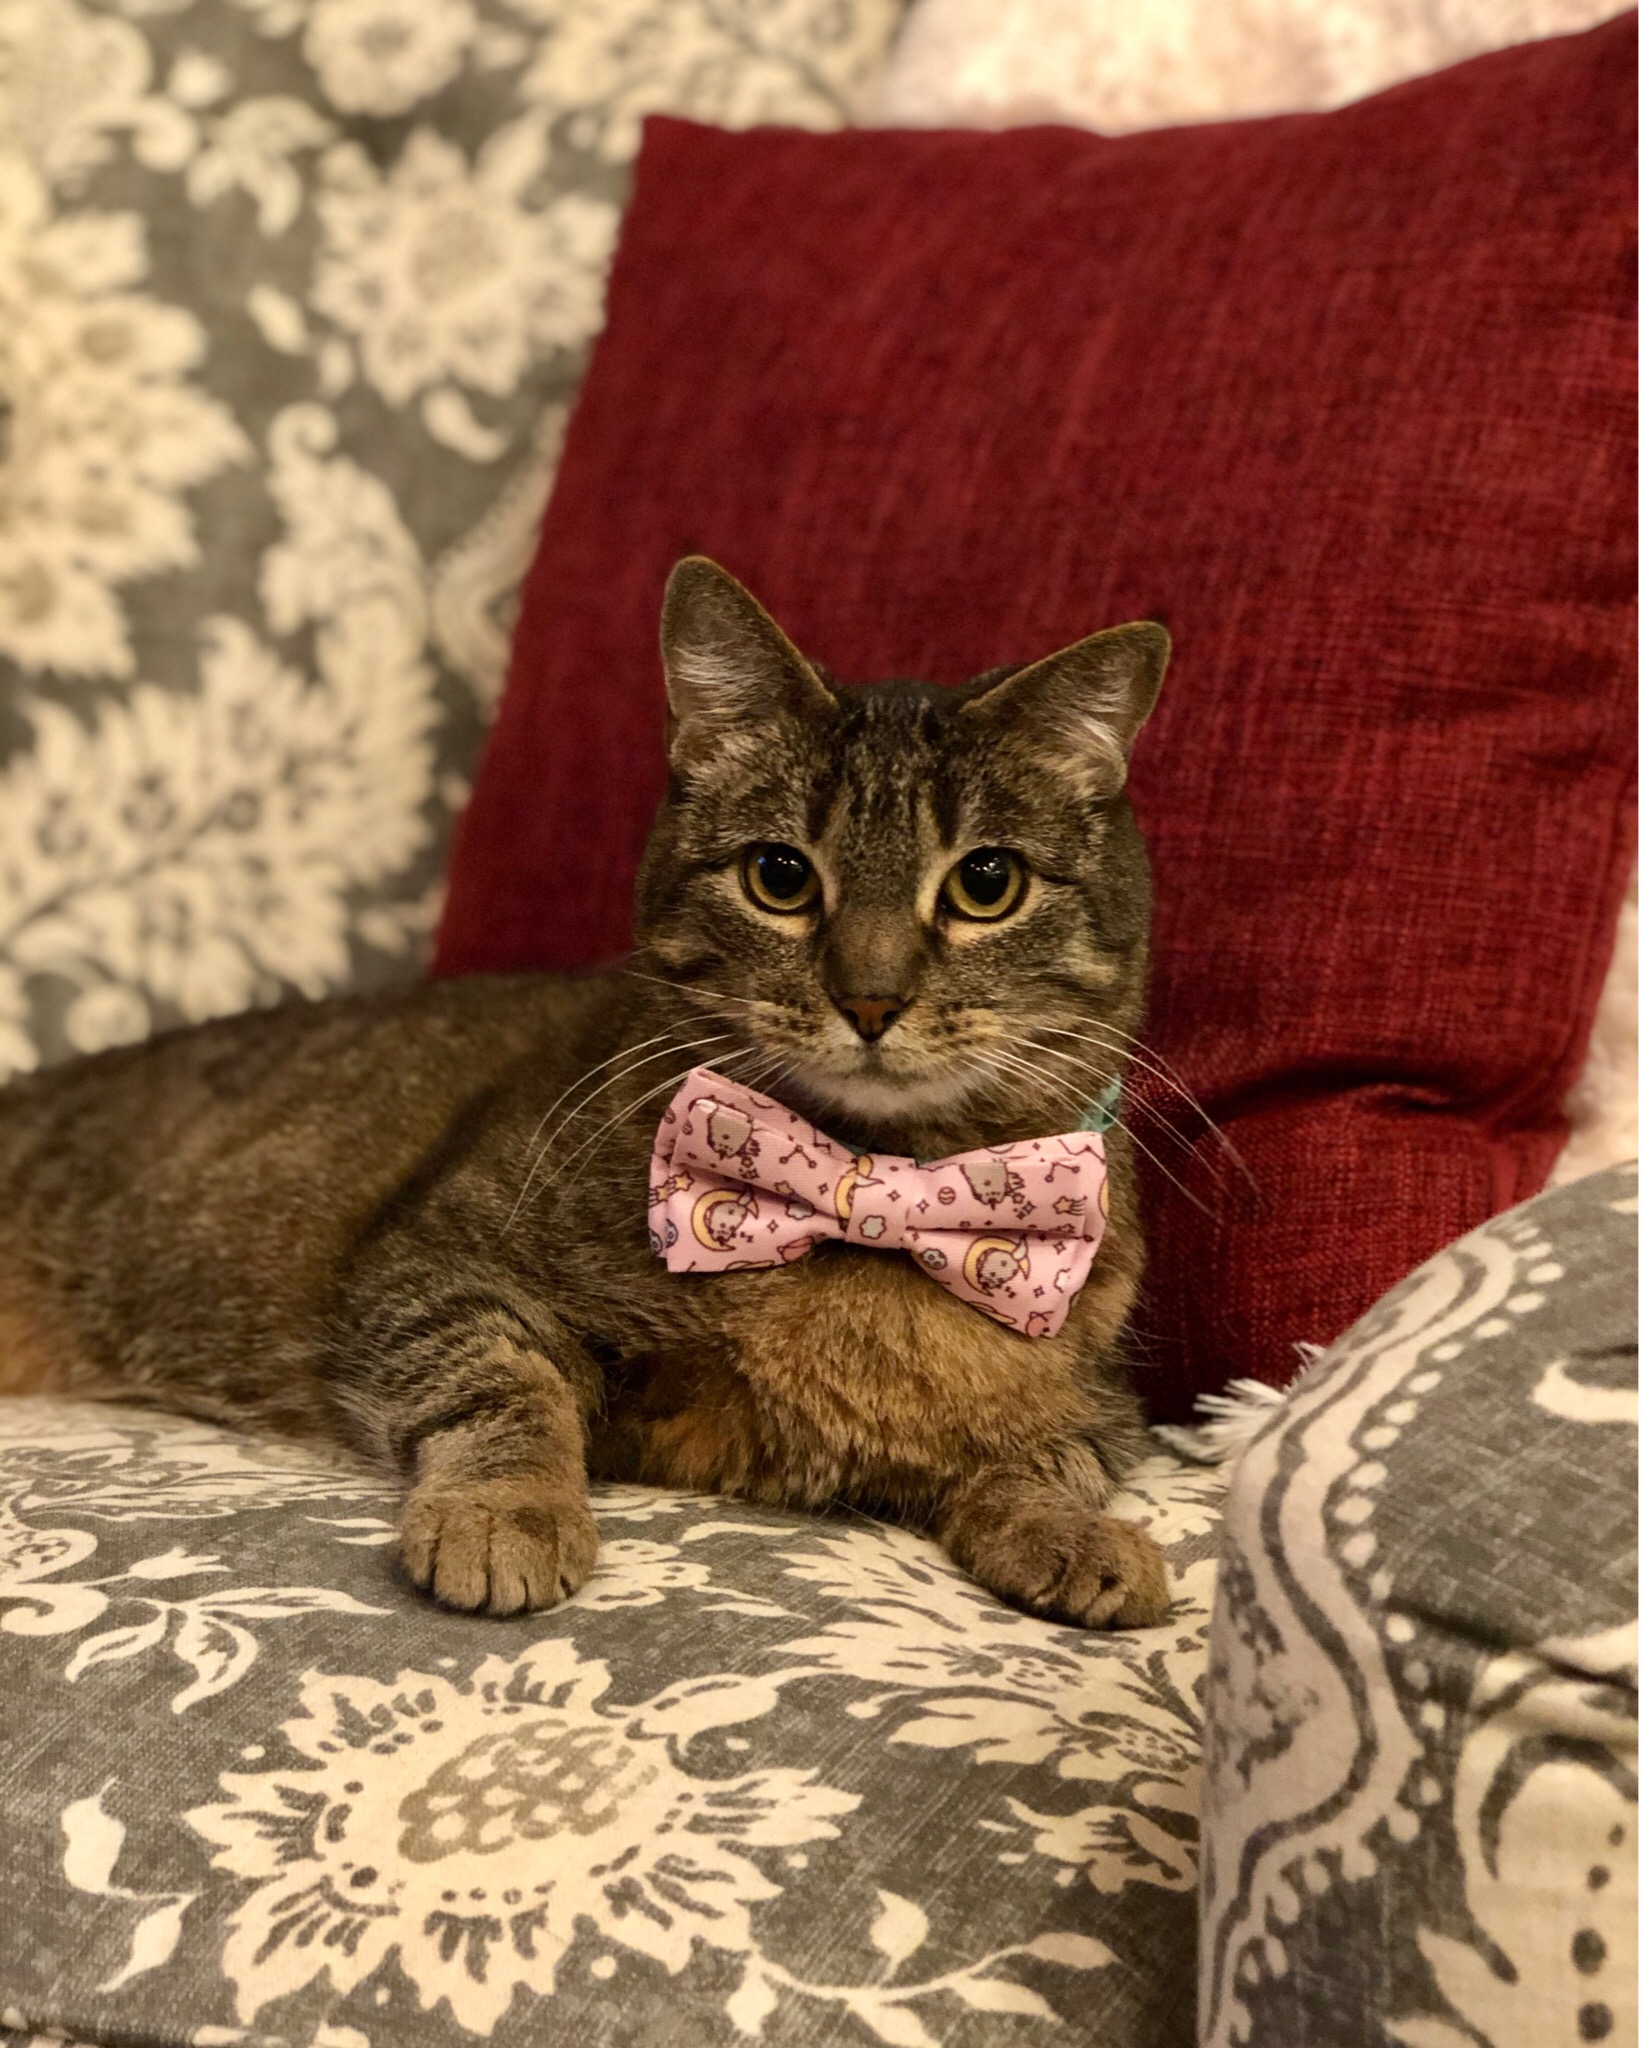 Miss Kitty in her bow tie!